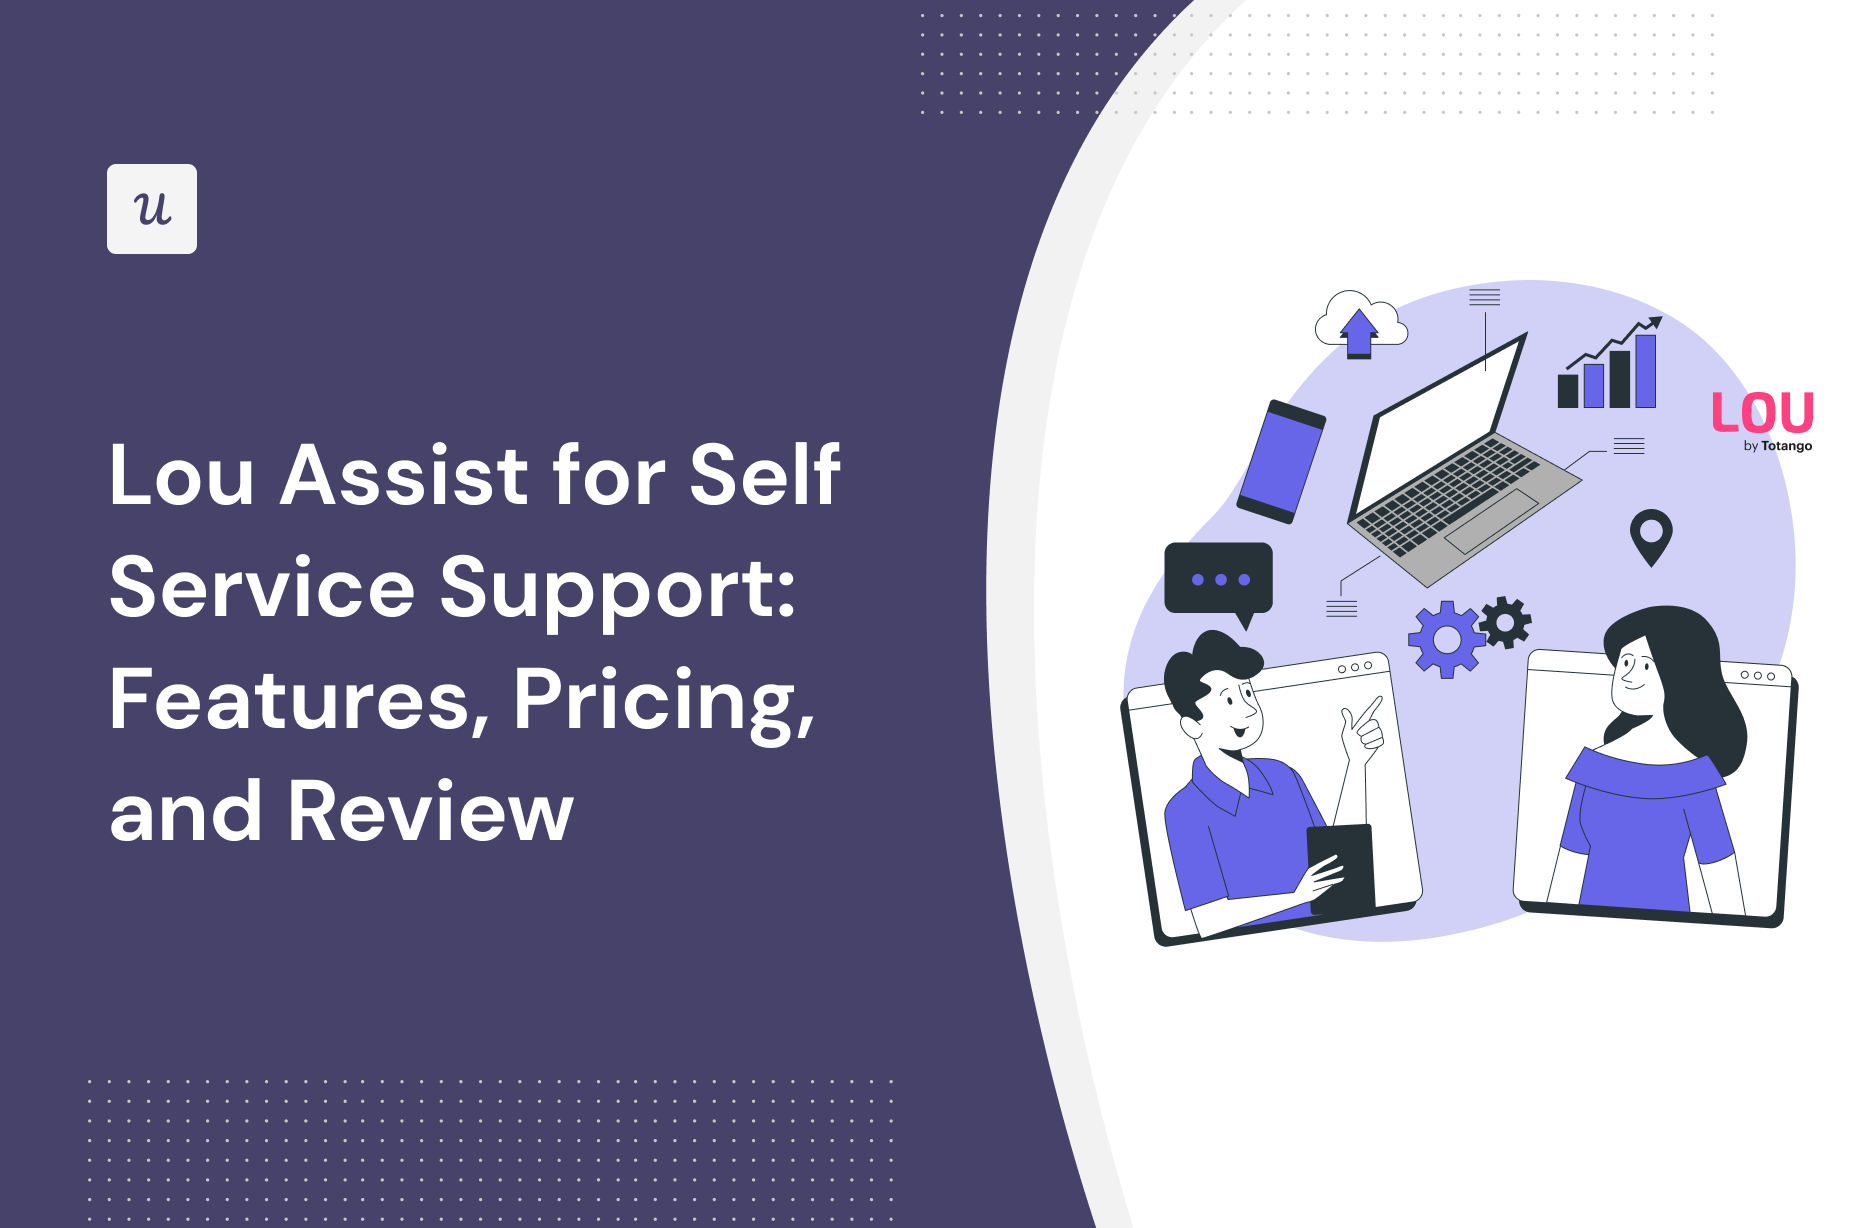 Lou Assist for Self Service Support: Features, Pricing, and Review